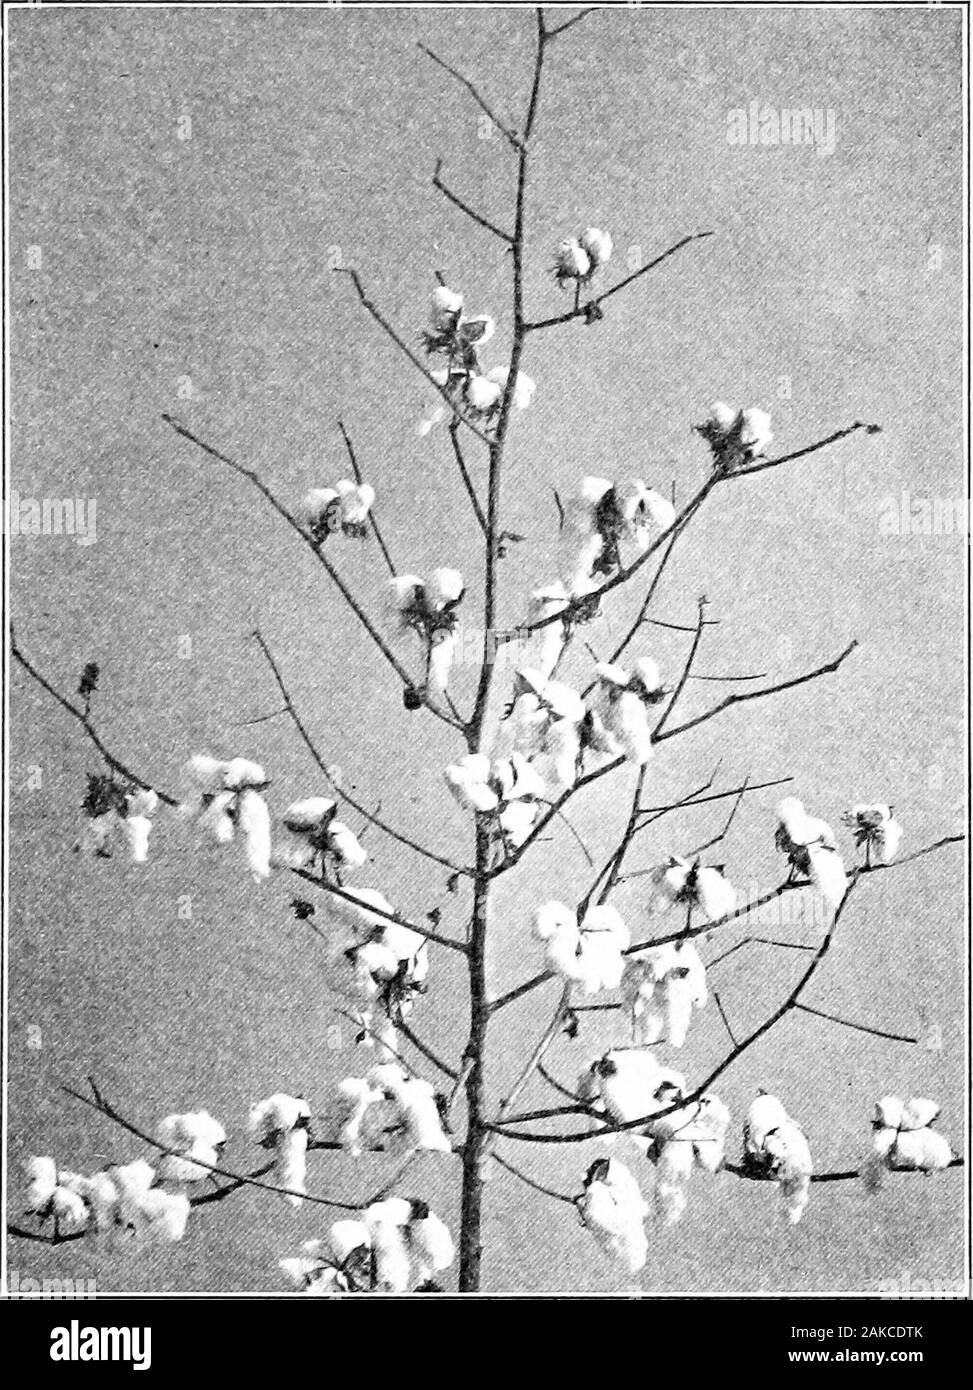 Southern field crops (exclusive of forage plants) . Fig. 122. — , Furn-ixu Branth,Showing that the buU-stenis arc Iiorno clirretl on the branch. called sterile limbs; this is because no lioll-stem or boll isborne directly on these vegetative limlis, though boll-stems,with attached Ijolls, spring from the subdivisions of thesemain branches. In general, a primary branch supports numerous leaves,and, on its sul)-l.)ranches, some bolls; while a fruitinglimb usually bears several bolls and but few leaves. Normally, two branches arise from the axil of a leaf onthe main stem (Fig. 123). One of thes Stock Photo